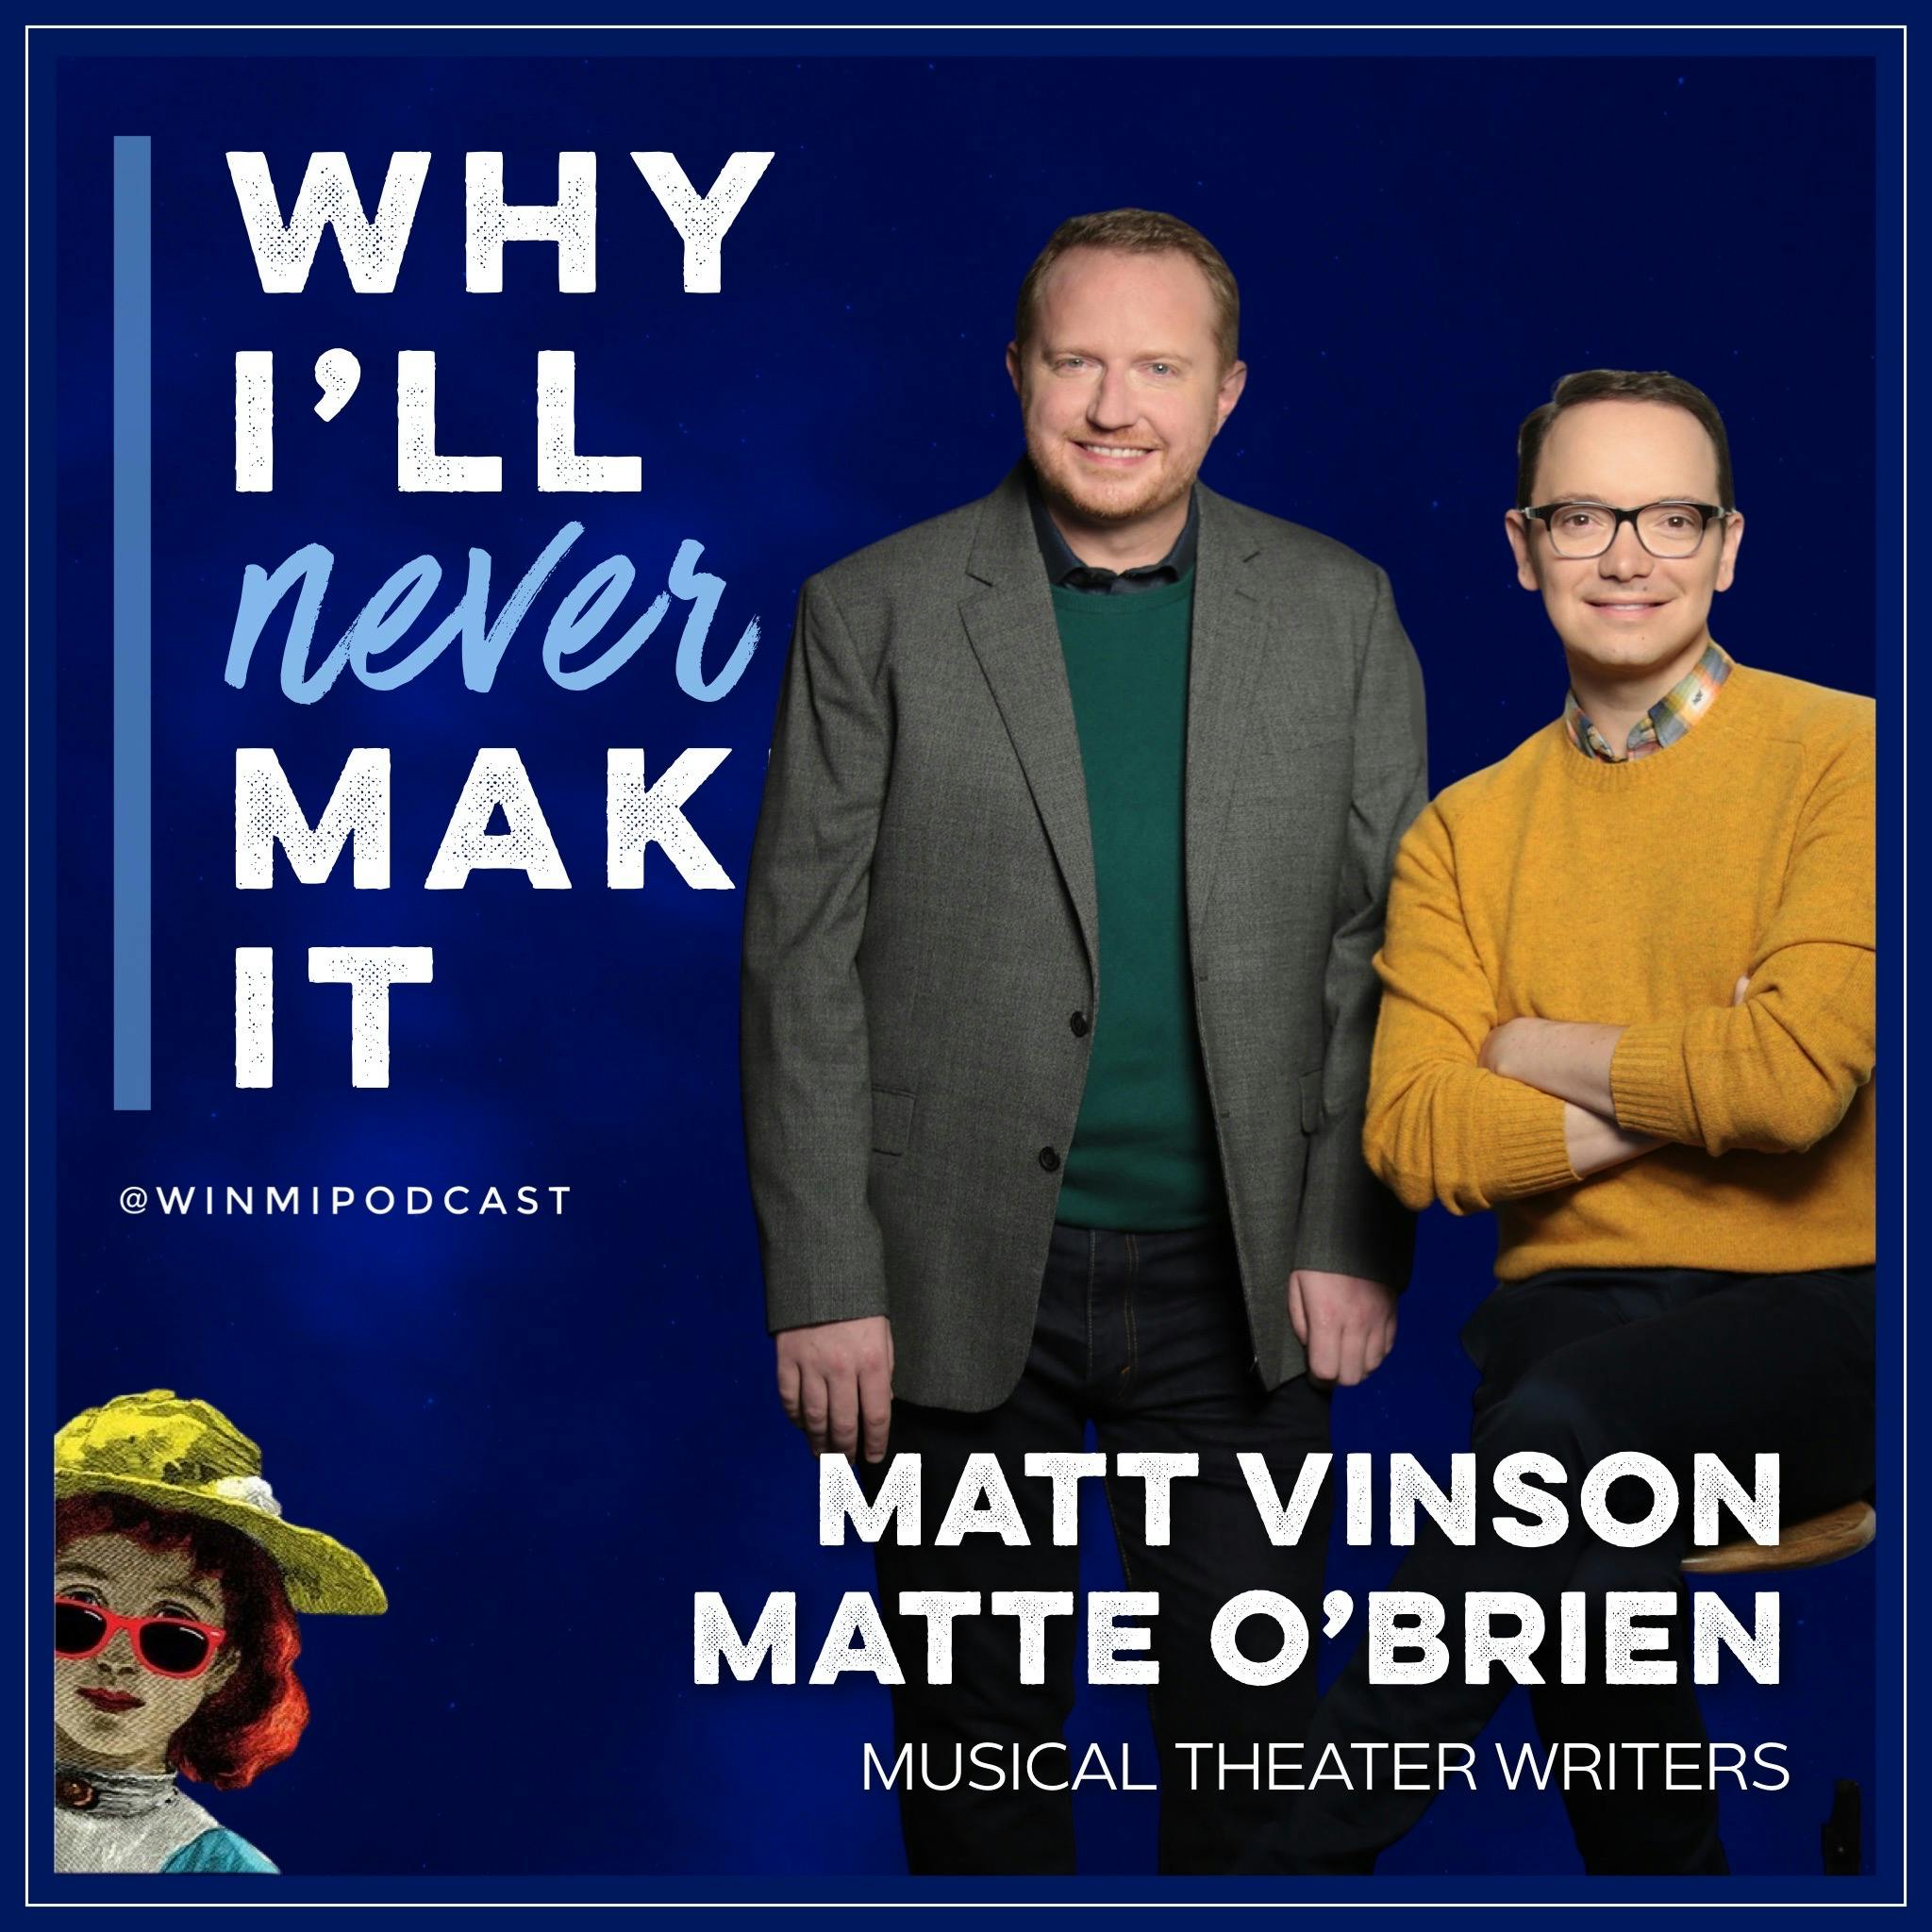 Matt Vinson & Matte O’Brien on the Joys and Challenges of Bringing a Musical to the Stage